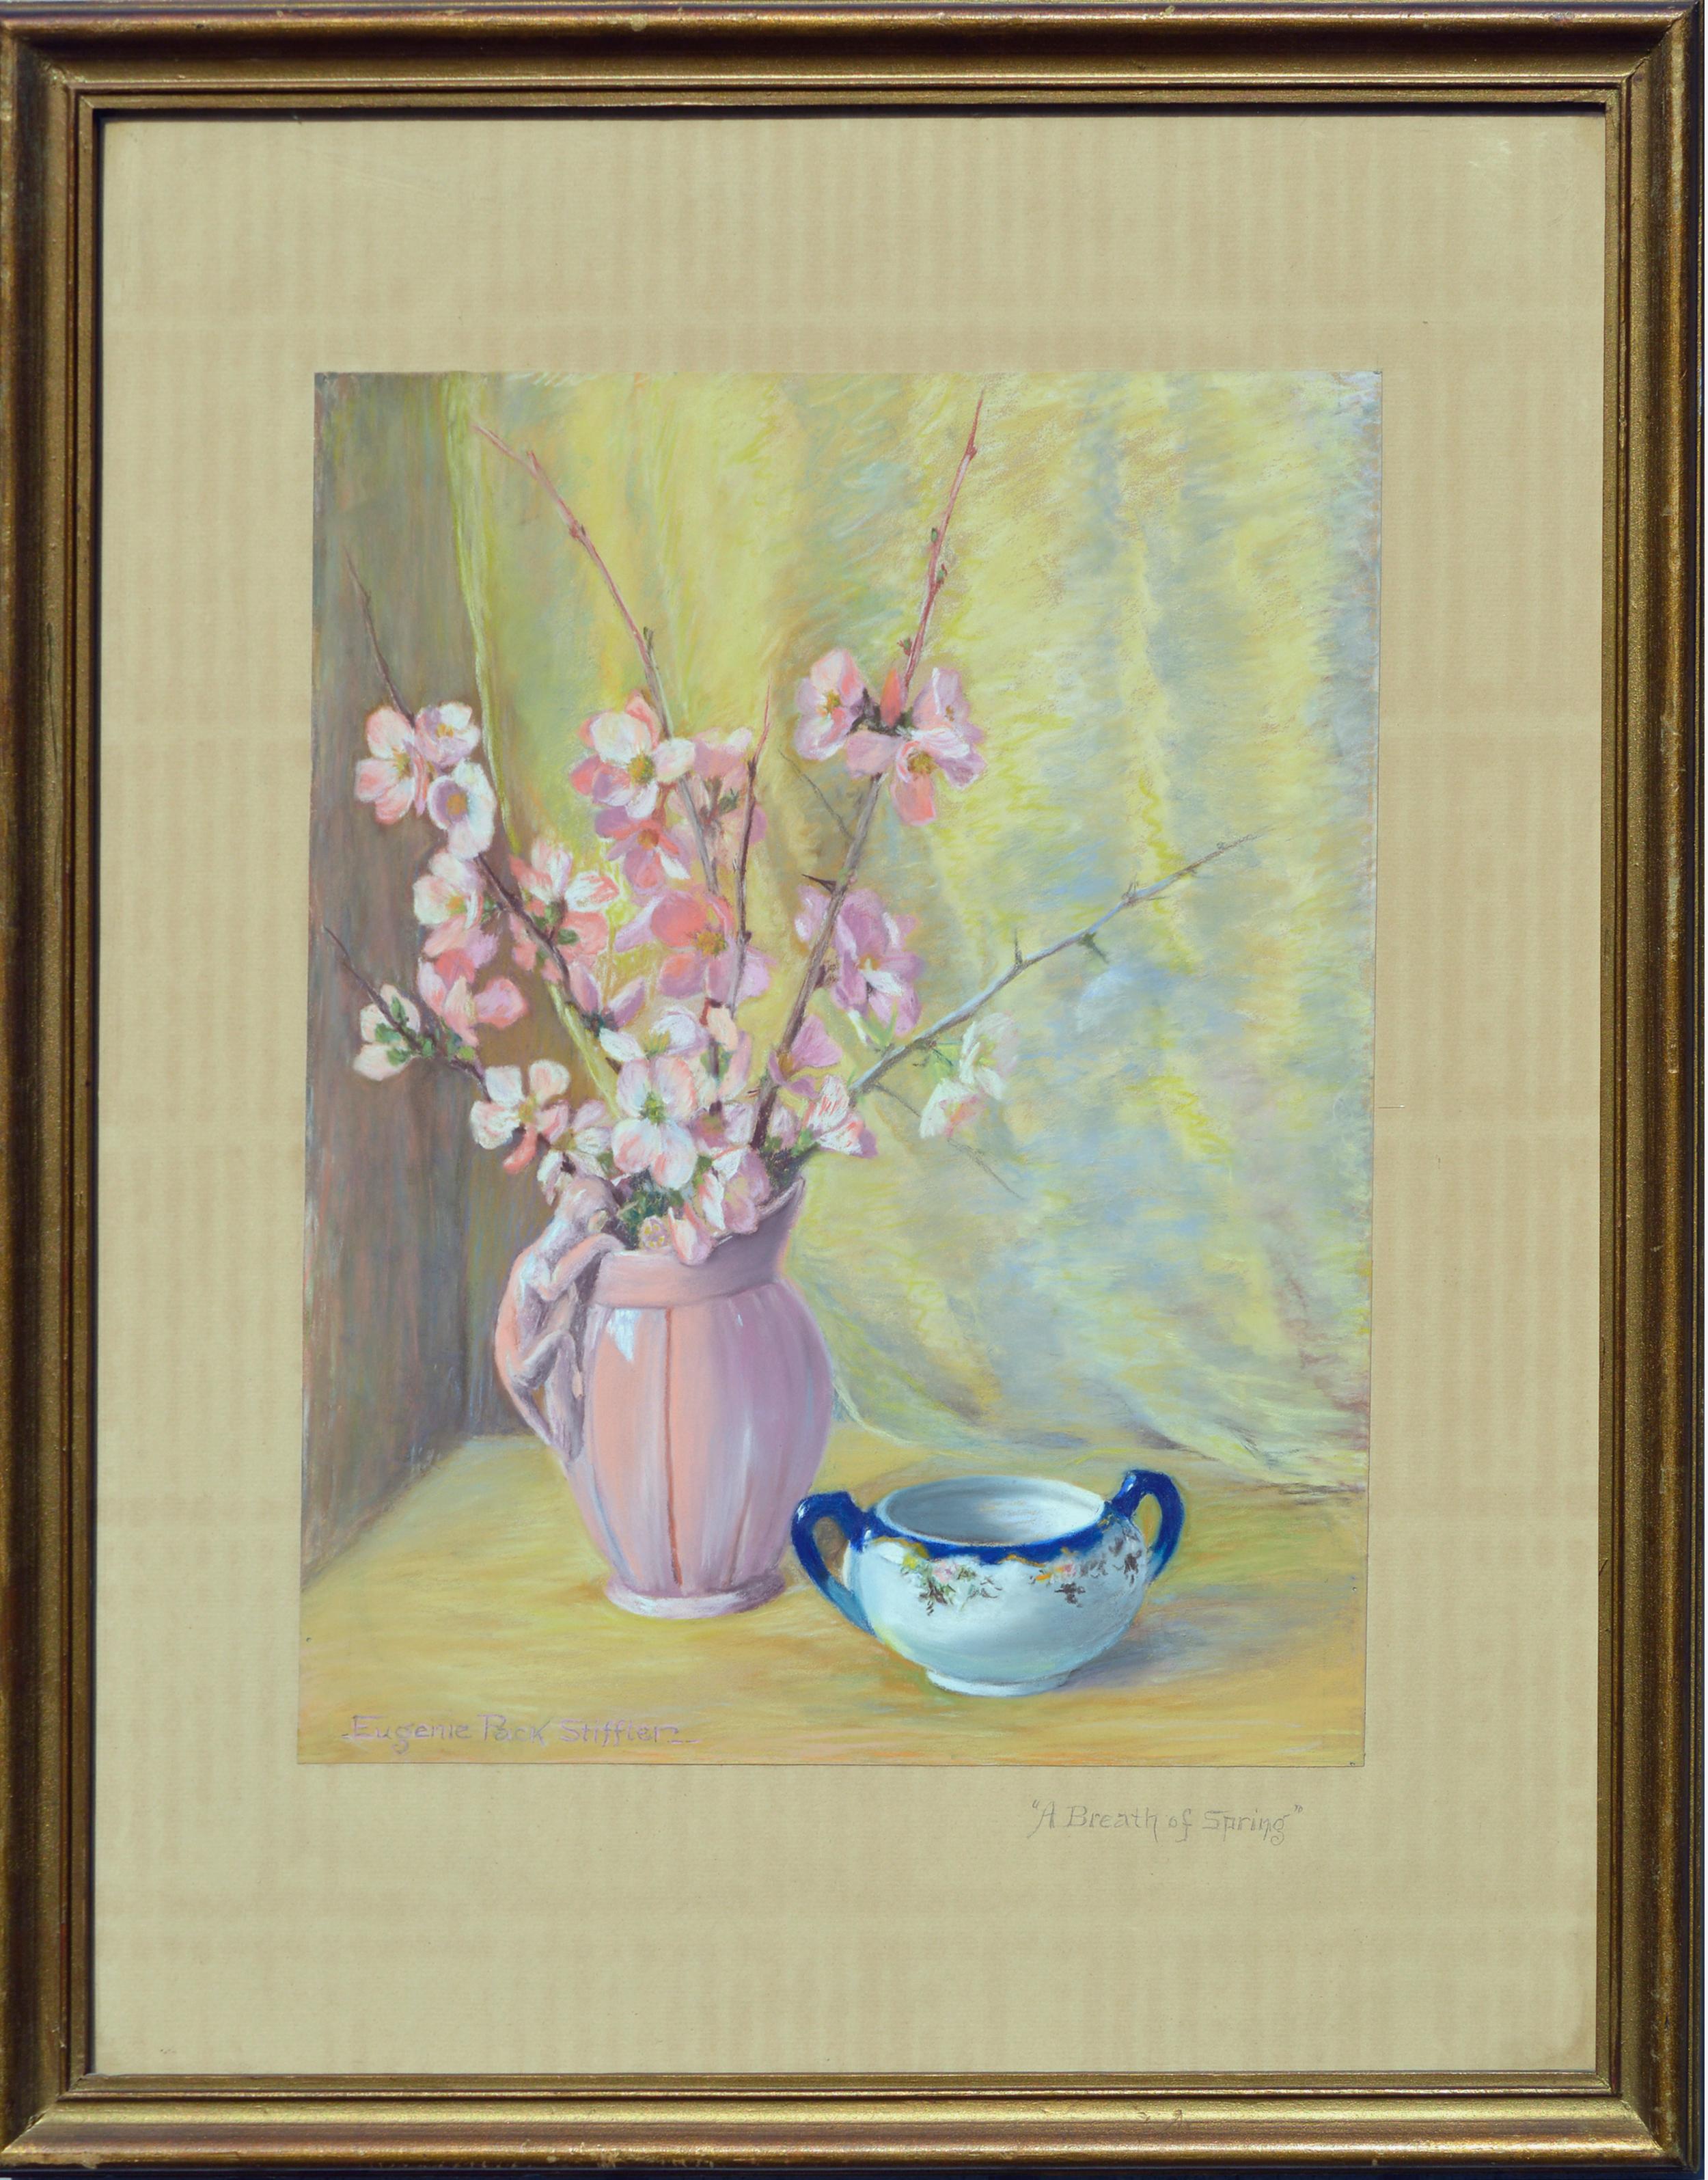 1940s Floral Still Life  -- A Breath of Spring  - Painting by Eugenie Pack Stiffler